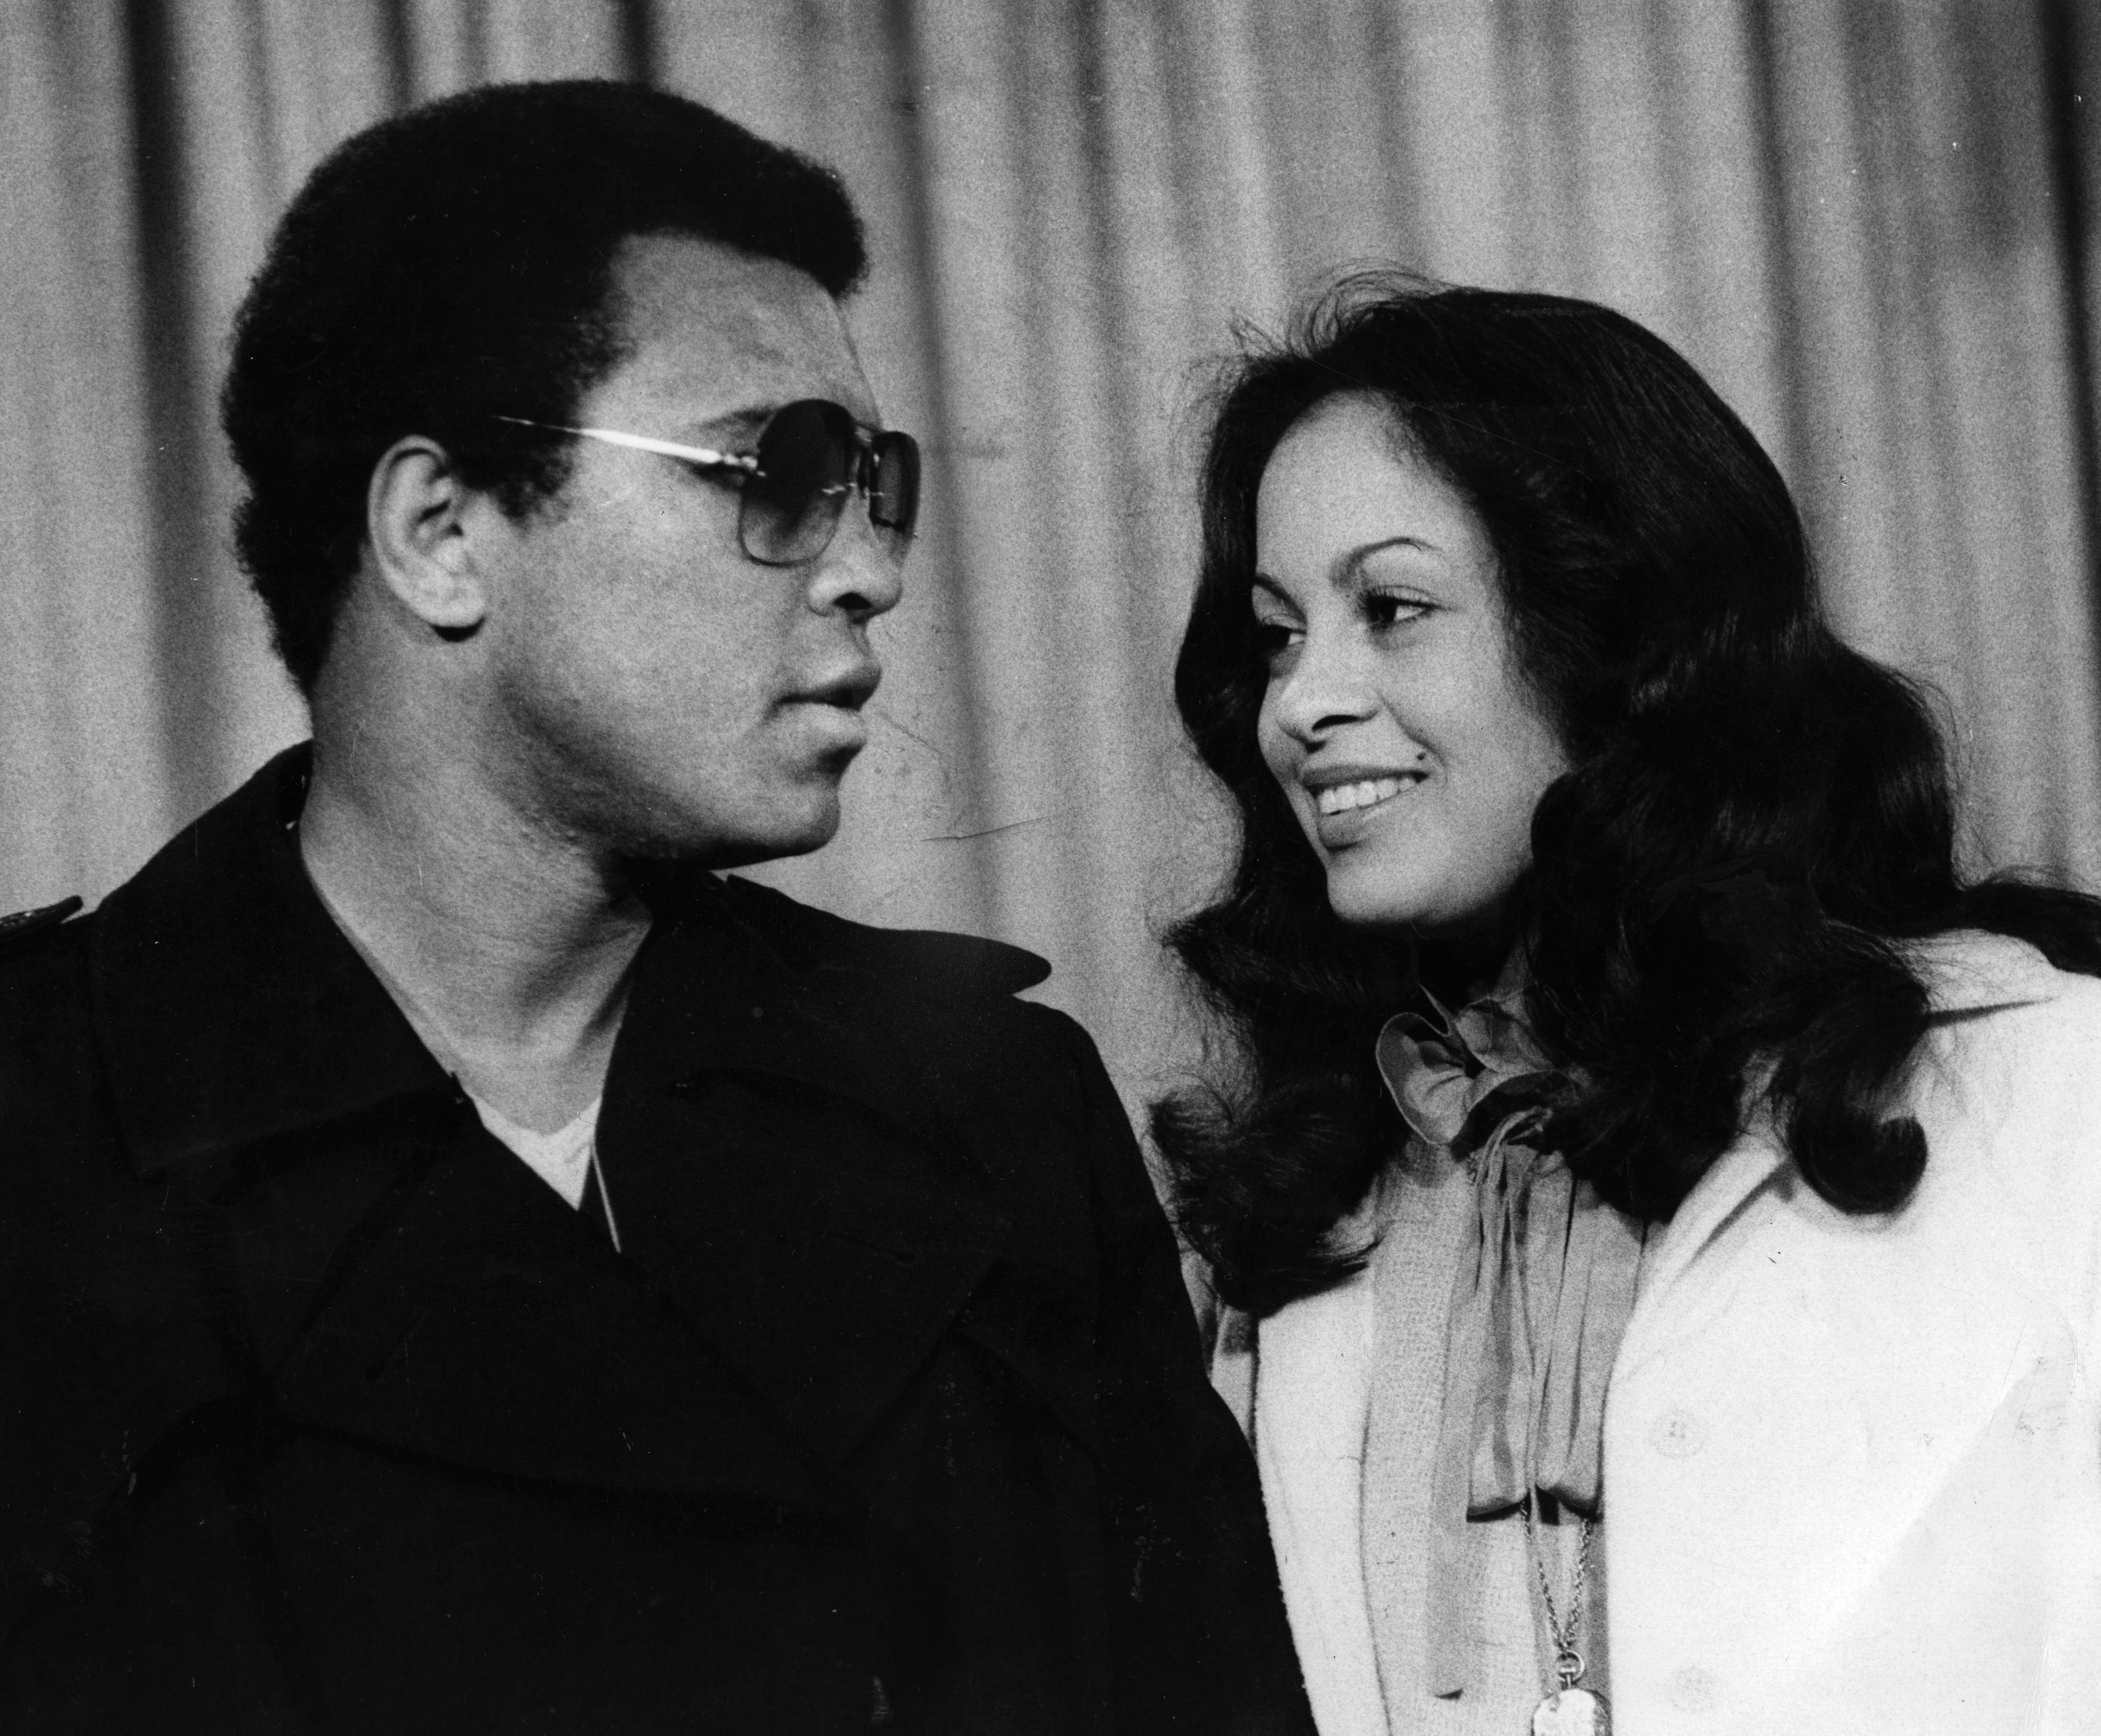 Muhammad Ali and his wife Veronica Porché at Heathrow Airport circa 1978. | Source: Getty Images